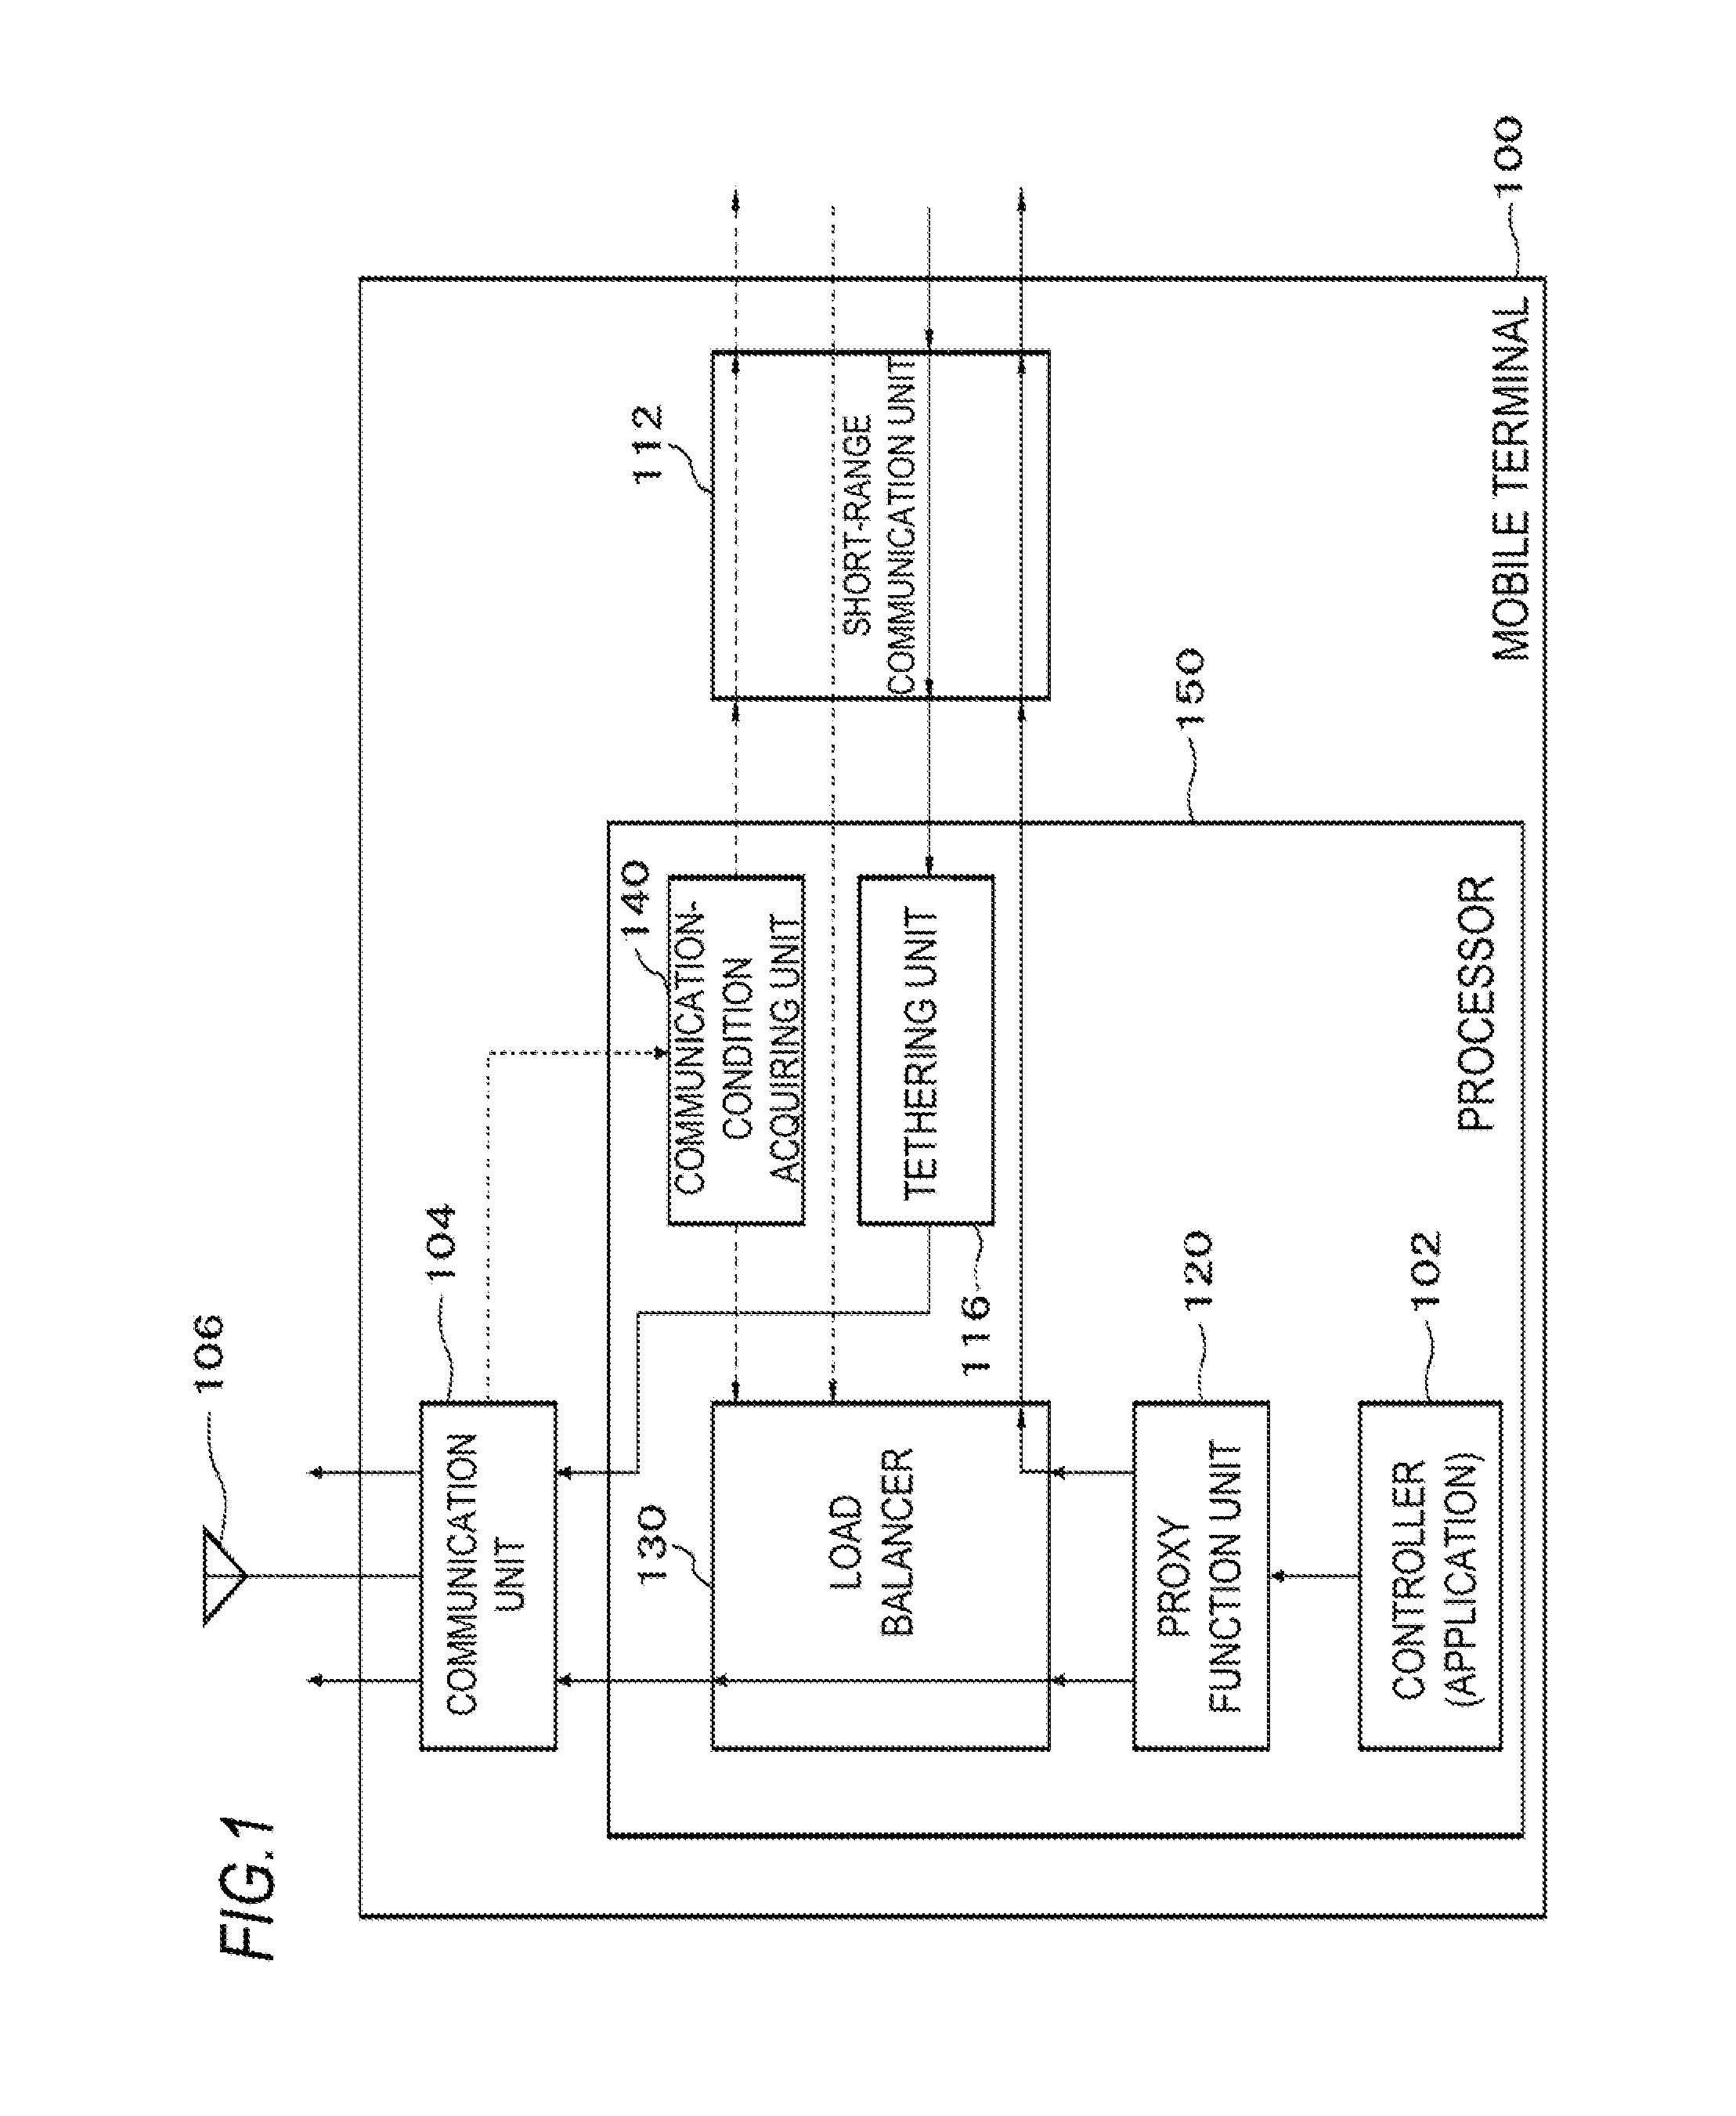 Mobile terminal, communications control processor, communications system, and communications method